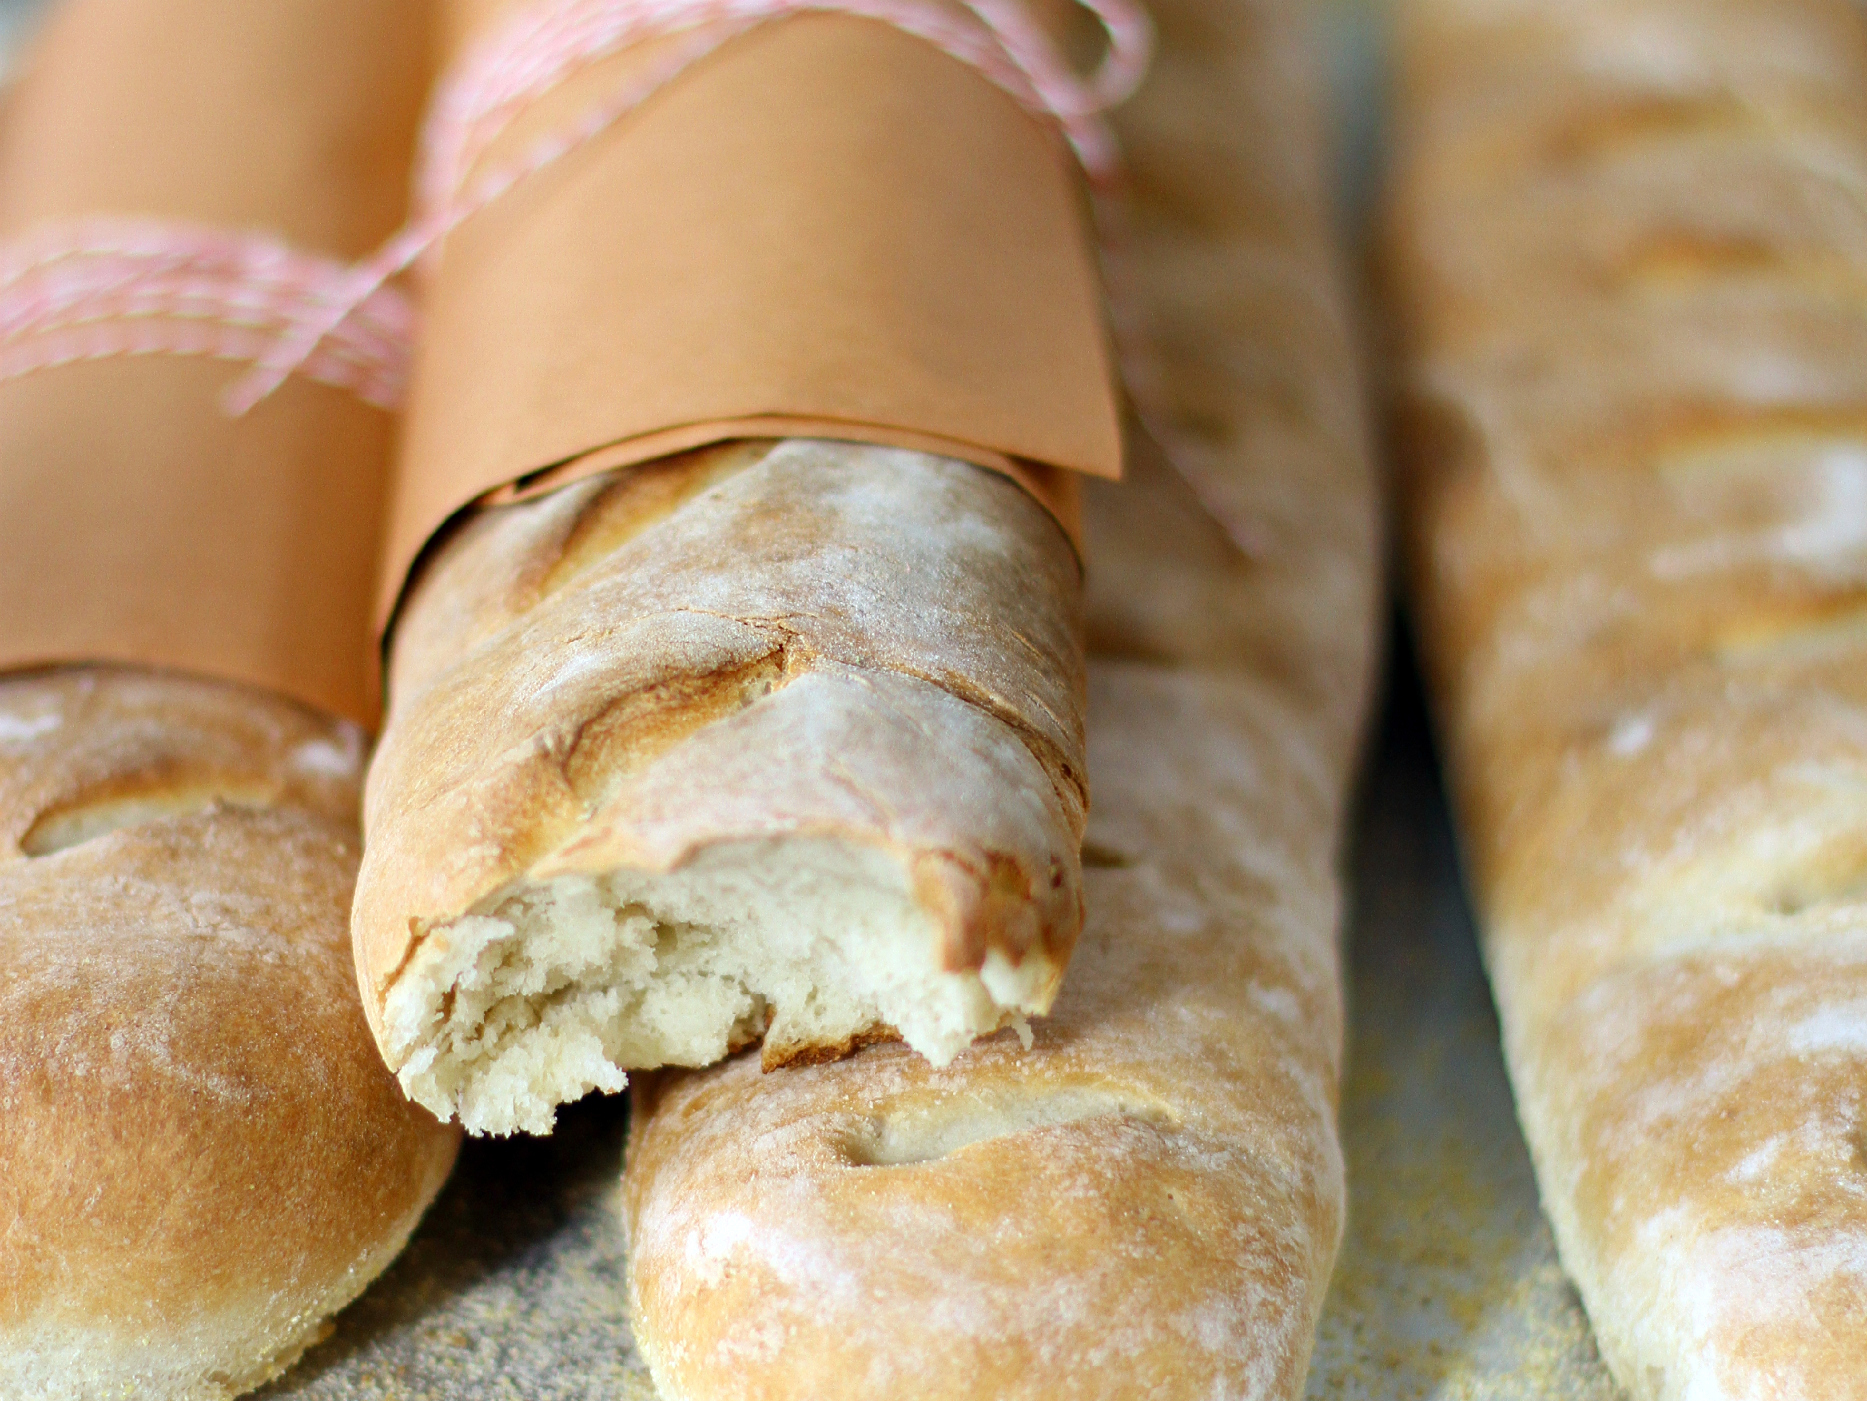 How to Make a French Baguette at Home Like a Professional Baker